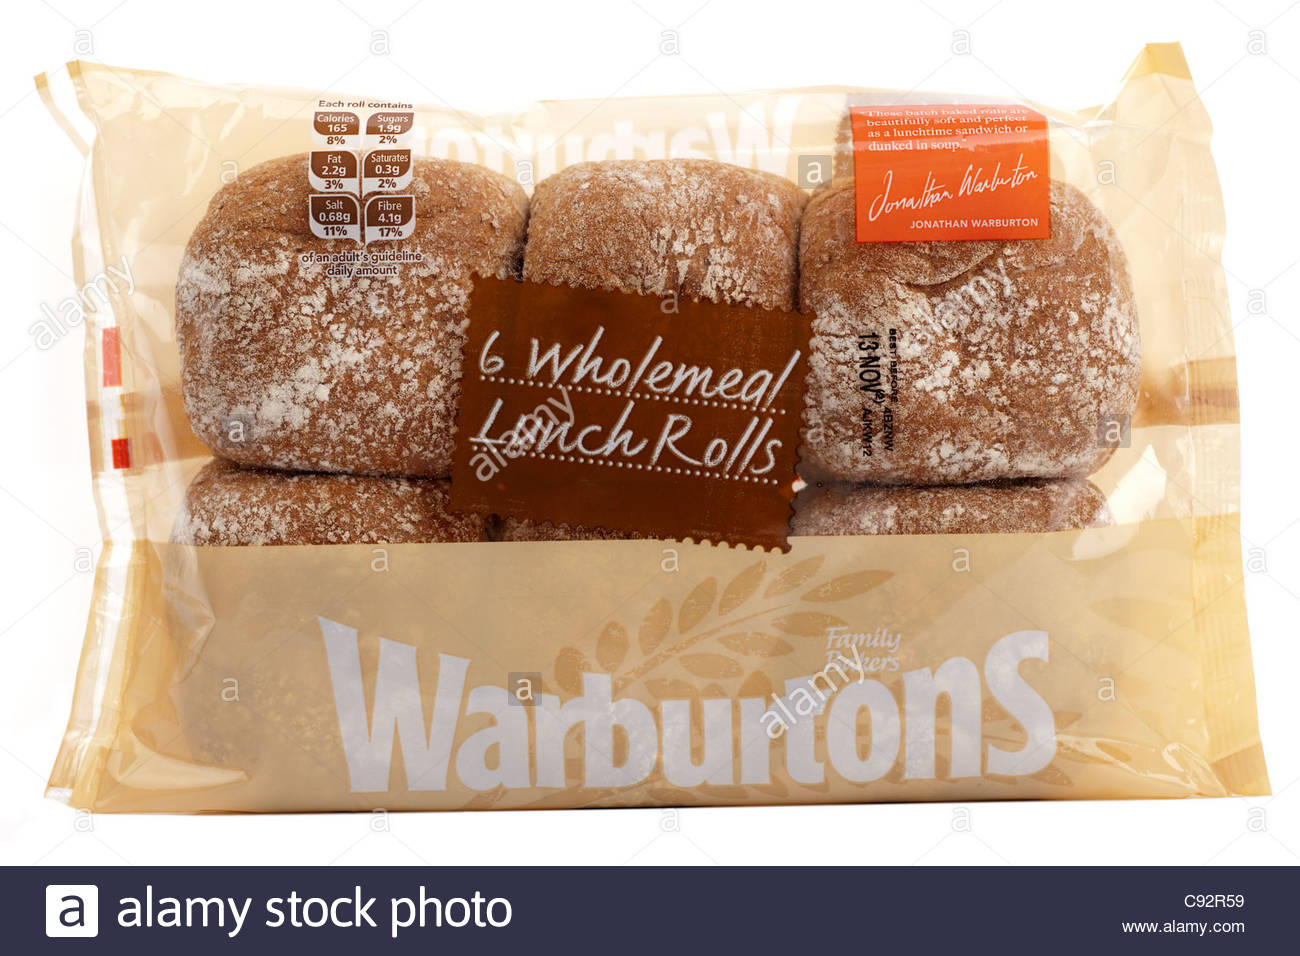 packet-of-six-jonathan-warburton-wholemeal-lunch-rolls-dated-13th-C92R59.jpg